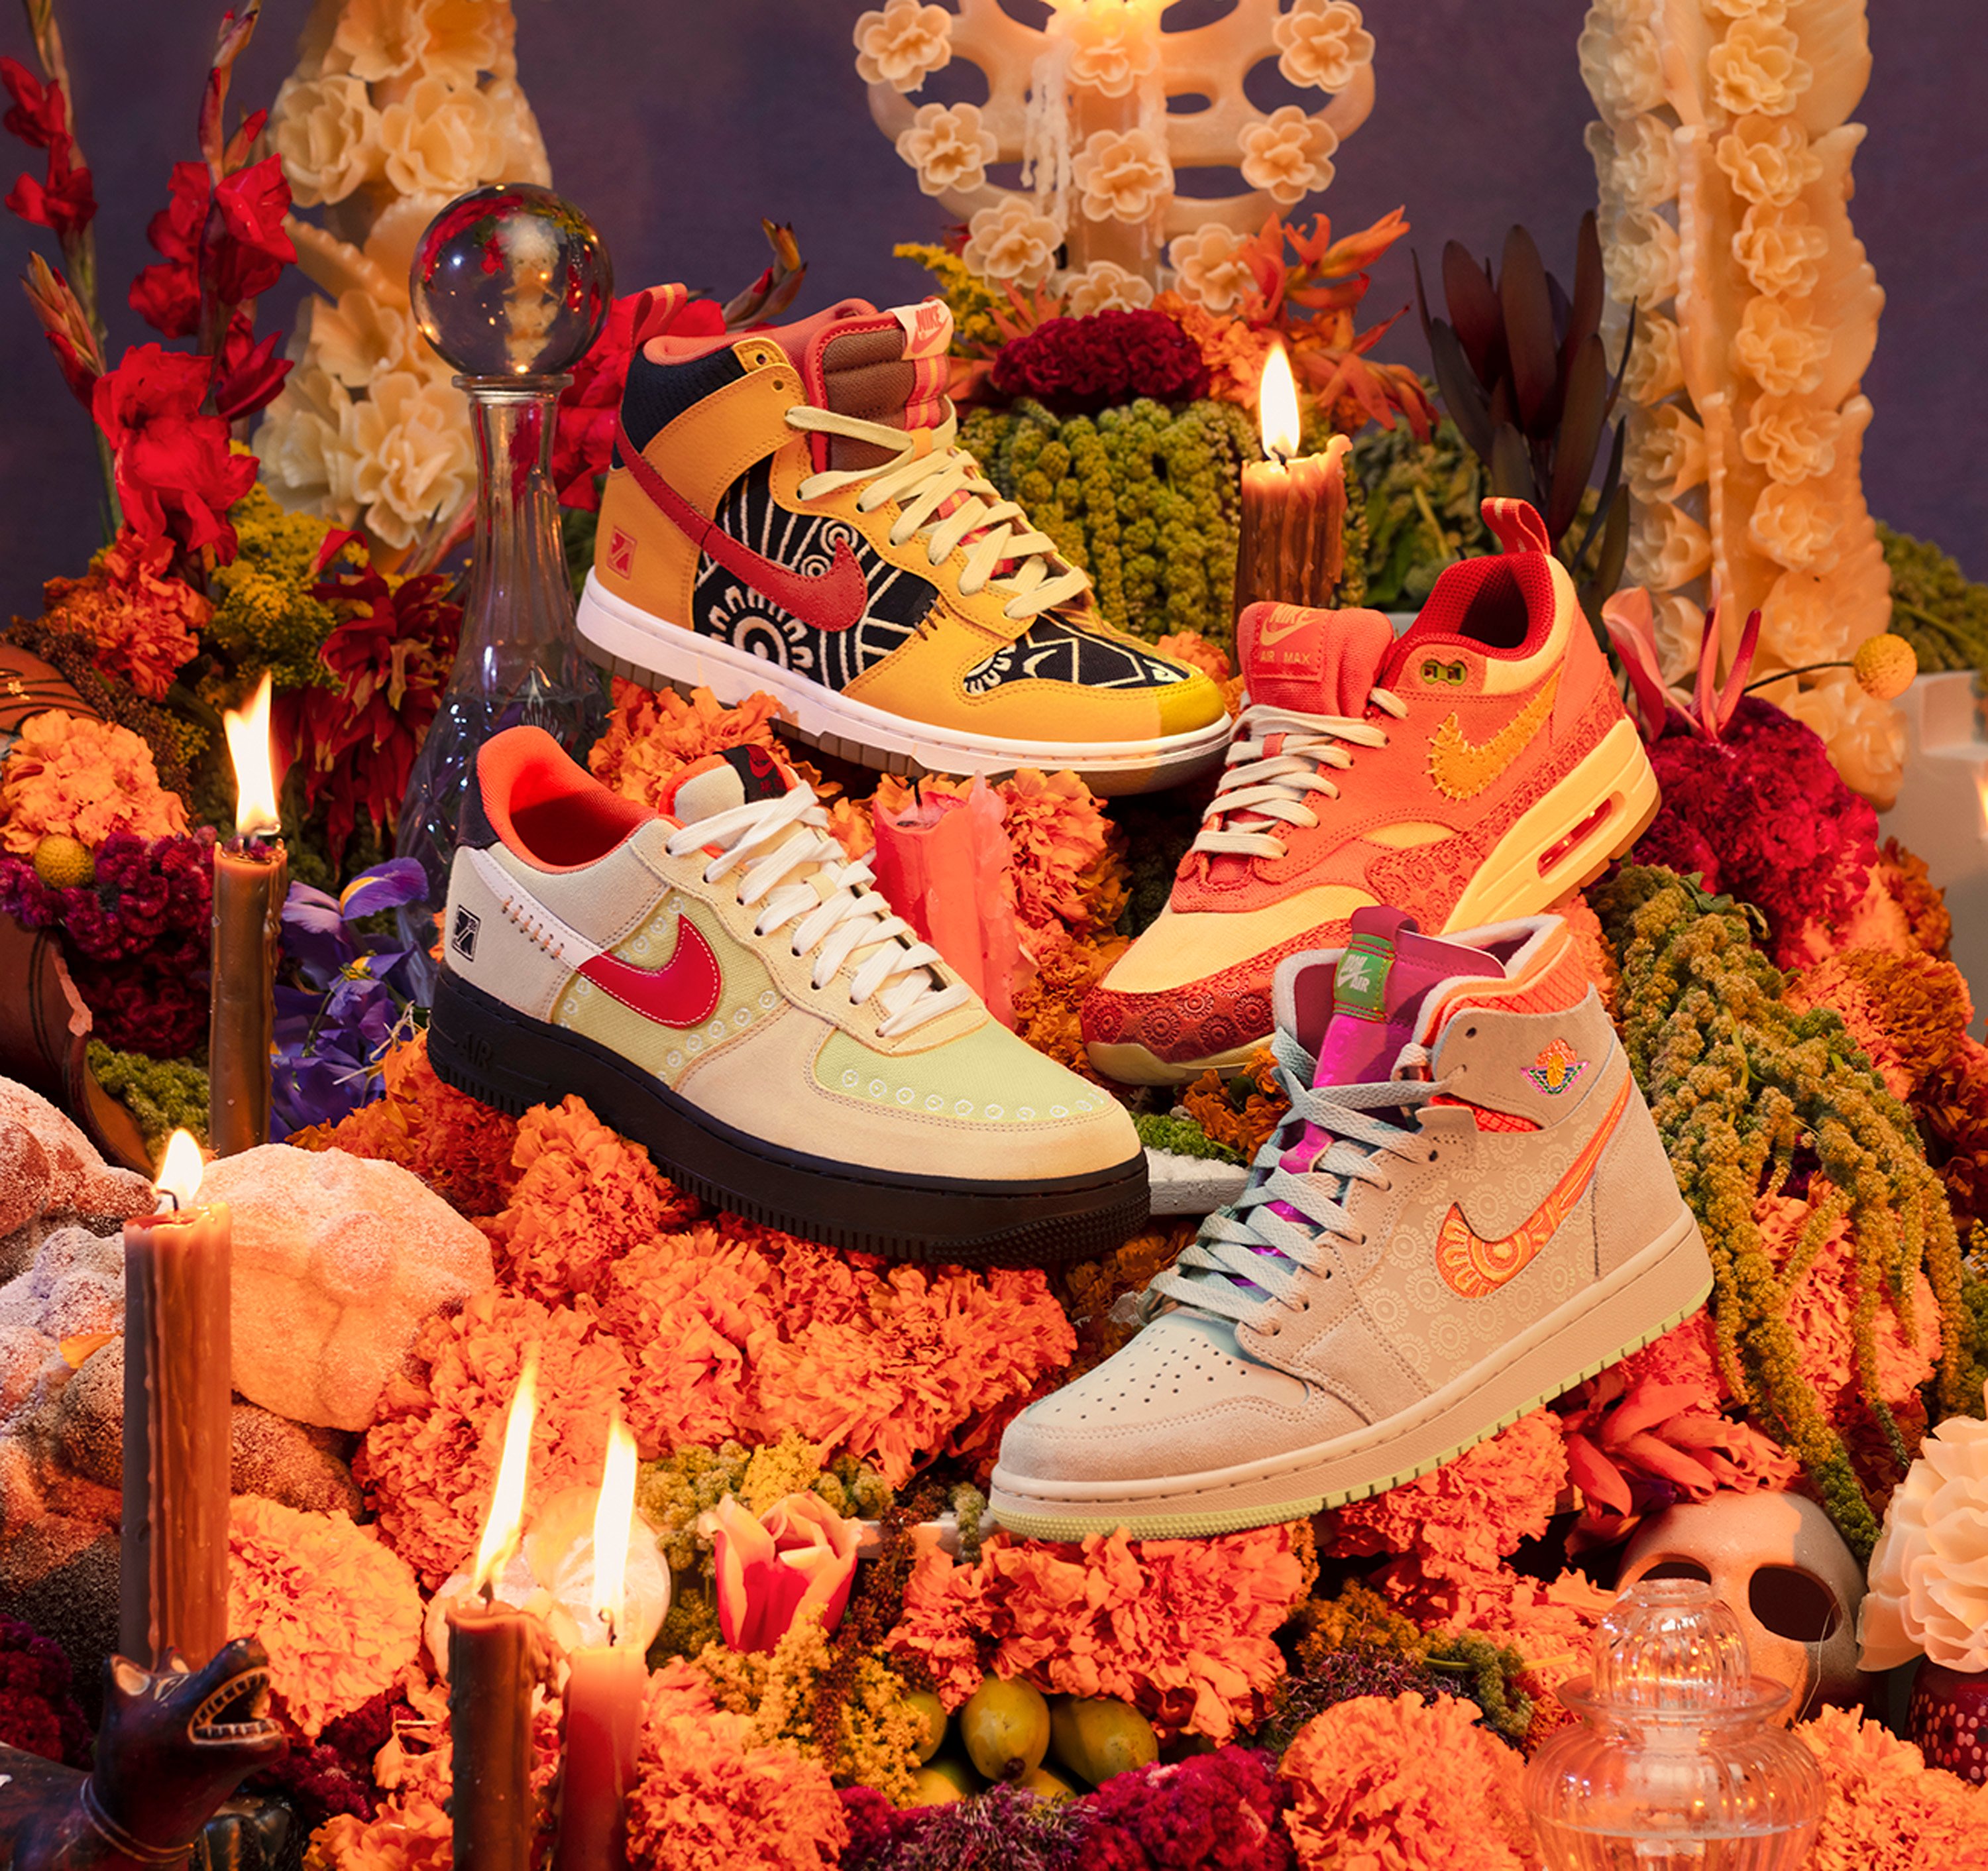 The Somos Familia collection by Nike, Mexico